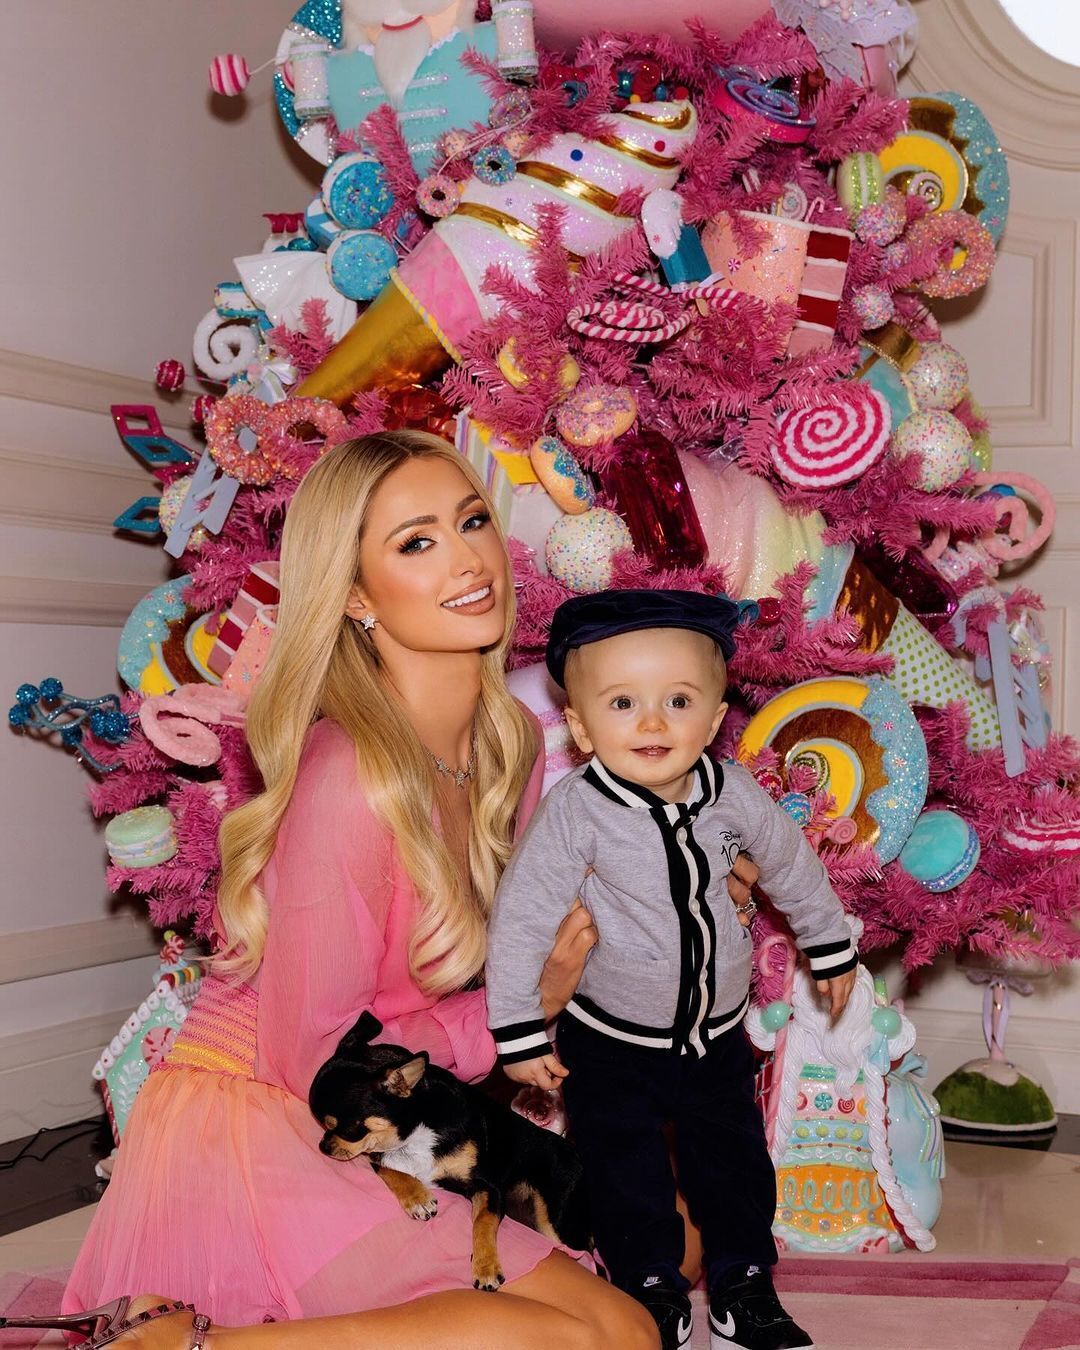 Difficult childhood, rape, and son's hate. What problems and traumas are hidden behind the glamorous picture of Paris Hilton's life